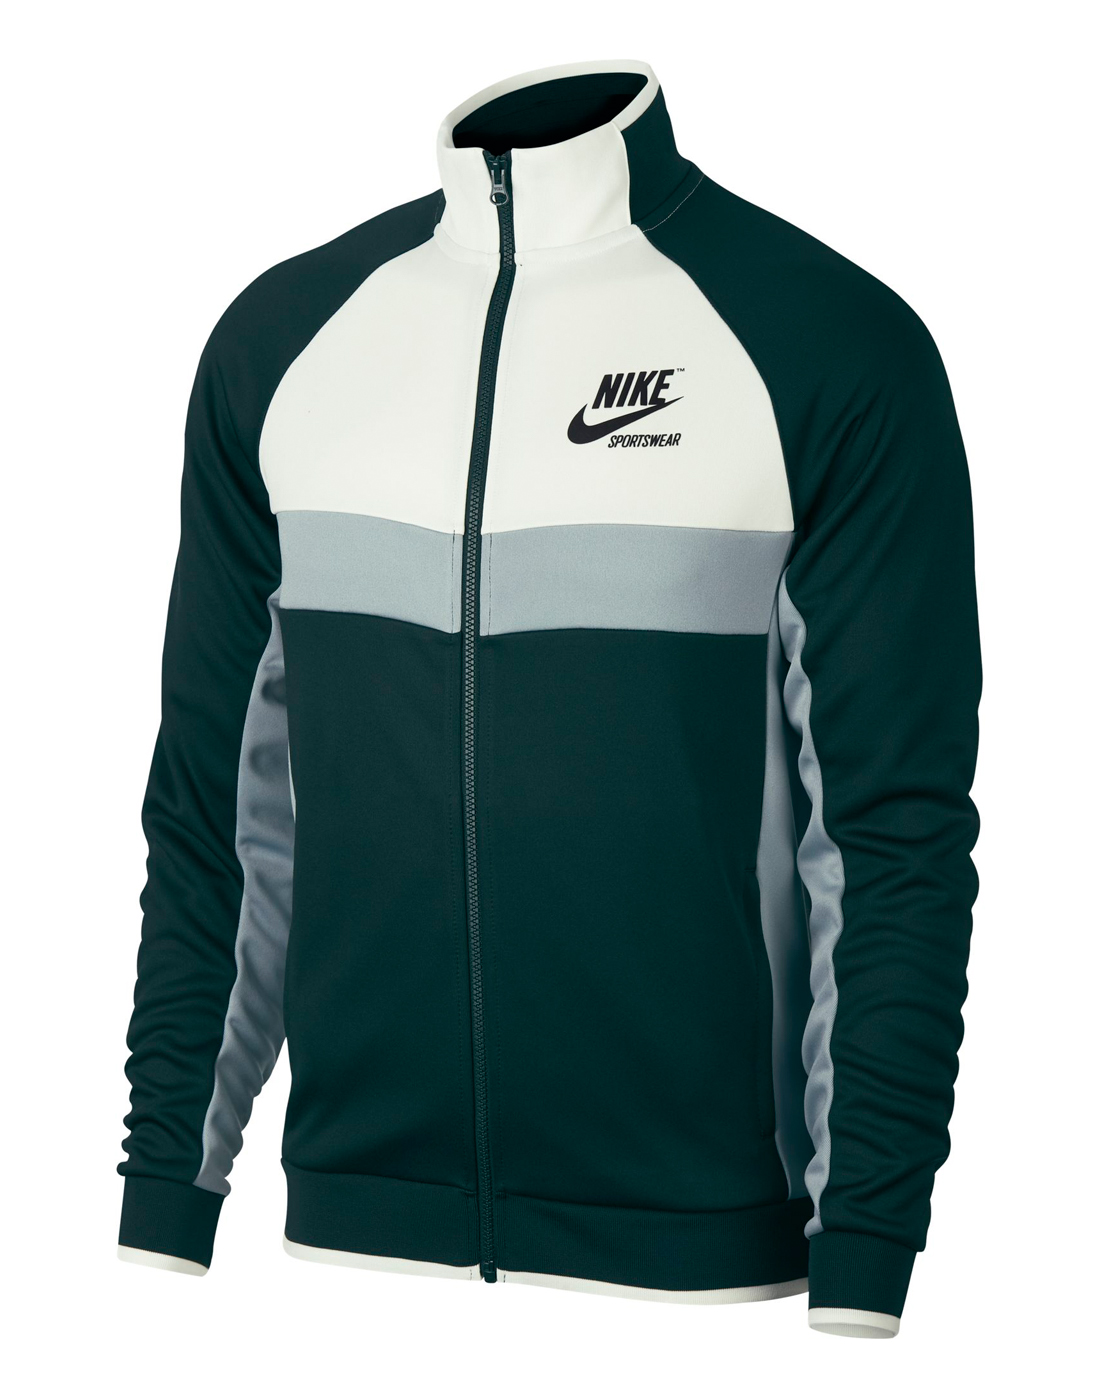 Nike Mens Archive Track Top - Green | Life Style Sports UK